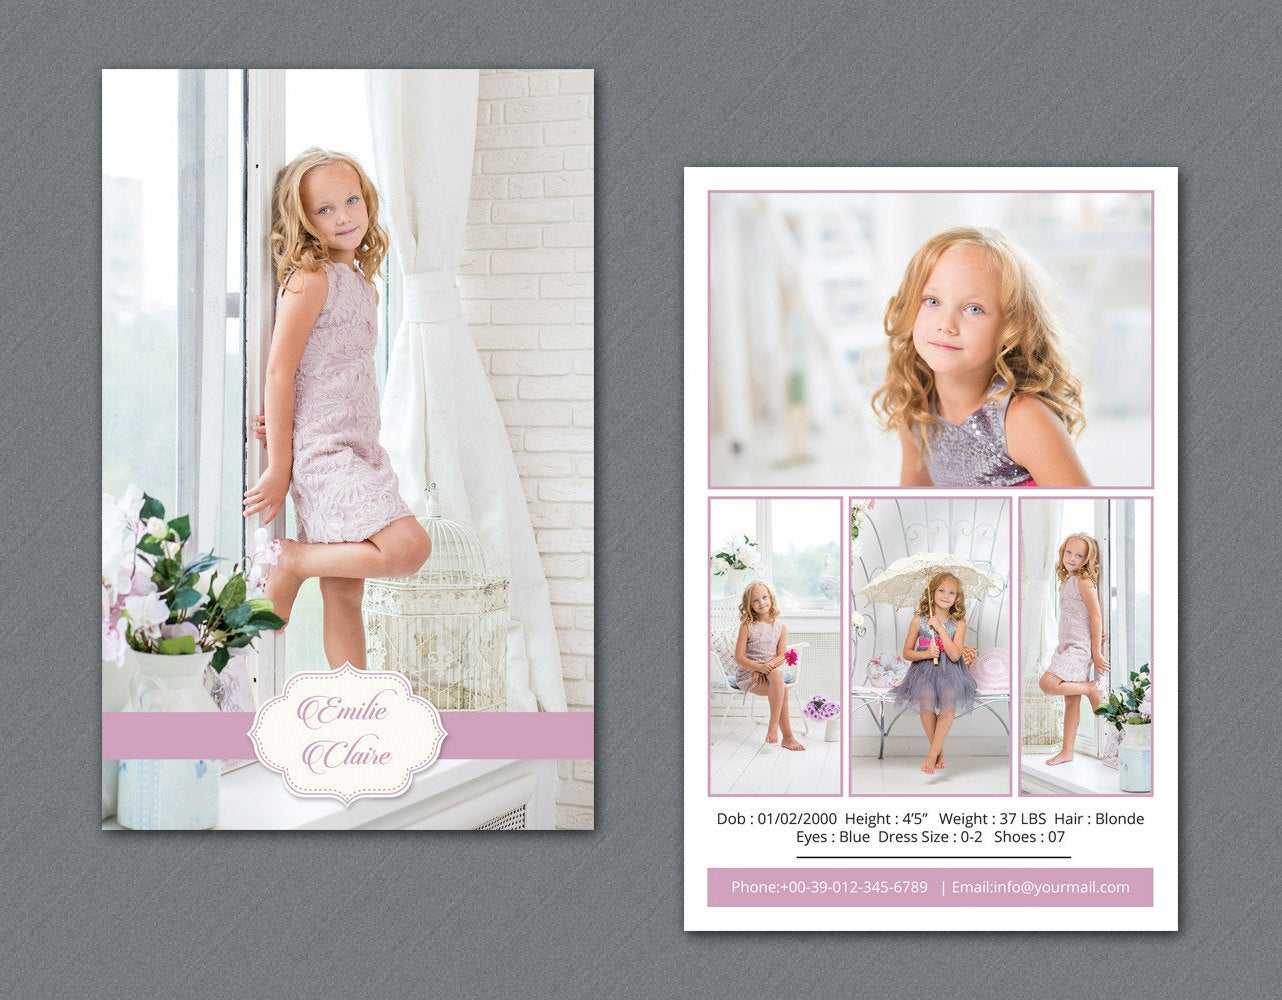 Comp Card Templates ] – On Sale Model Comp Card Photoshop With Comp Card Template Download